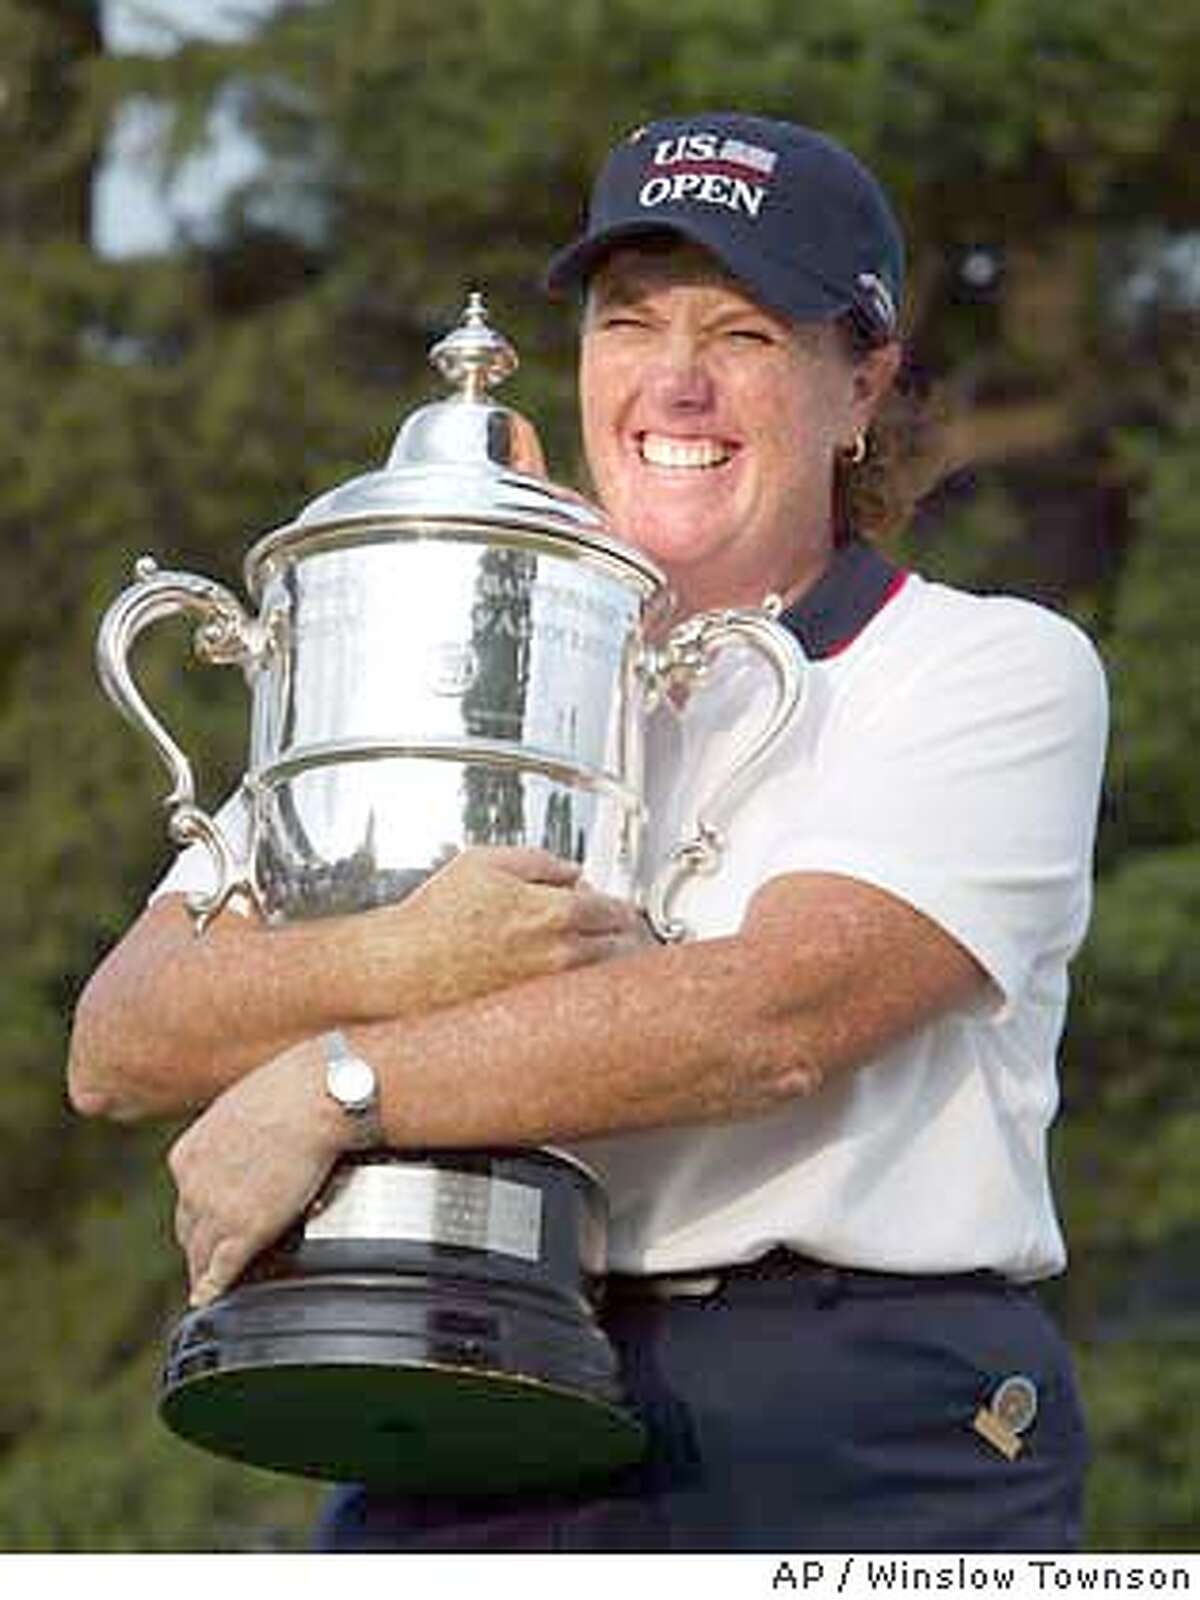 Meg Mallon holds the trophy after winning the U.S. Women's Open at The Orchards Golf Club in South Hadley, Ma. Sunday, July 4, 2004 with a score of 10-under par 274. (AP Photo/Winslow Townson)